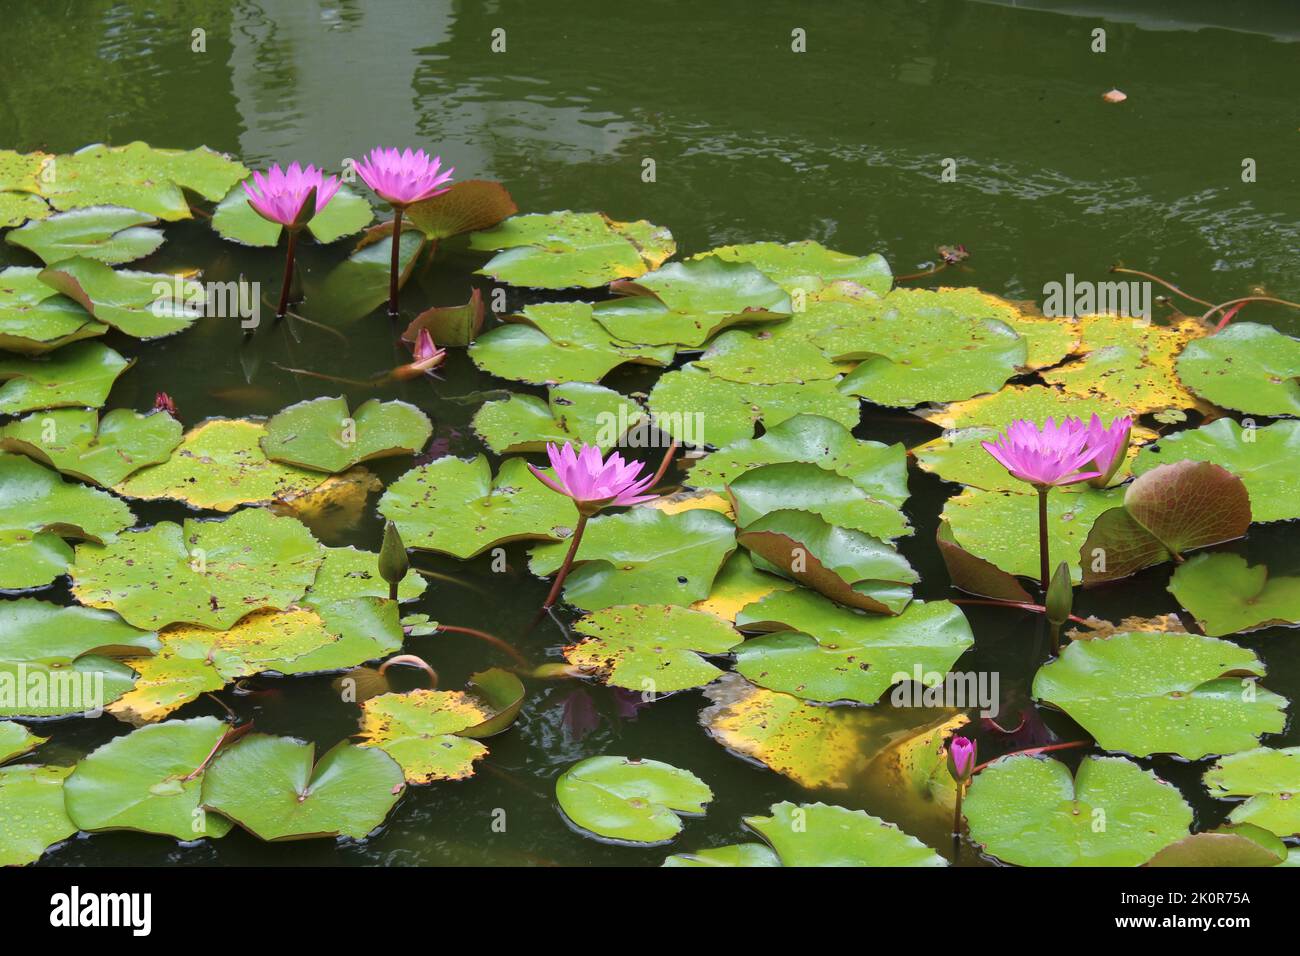 A lake surface with lotus leaves and pink lilies Stock Photo